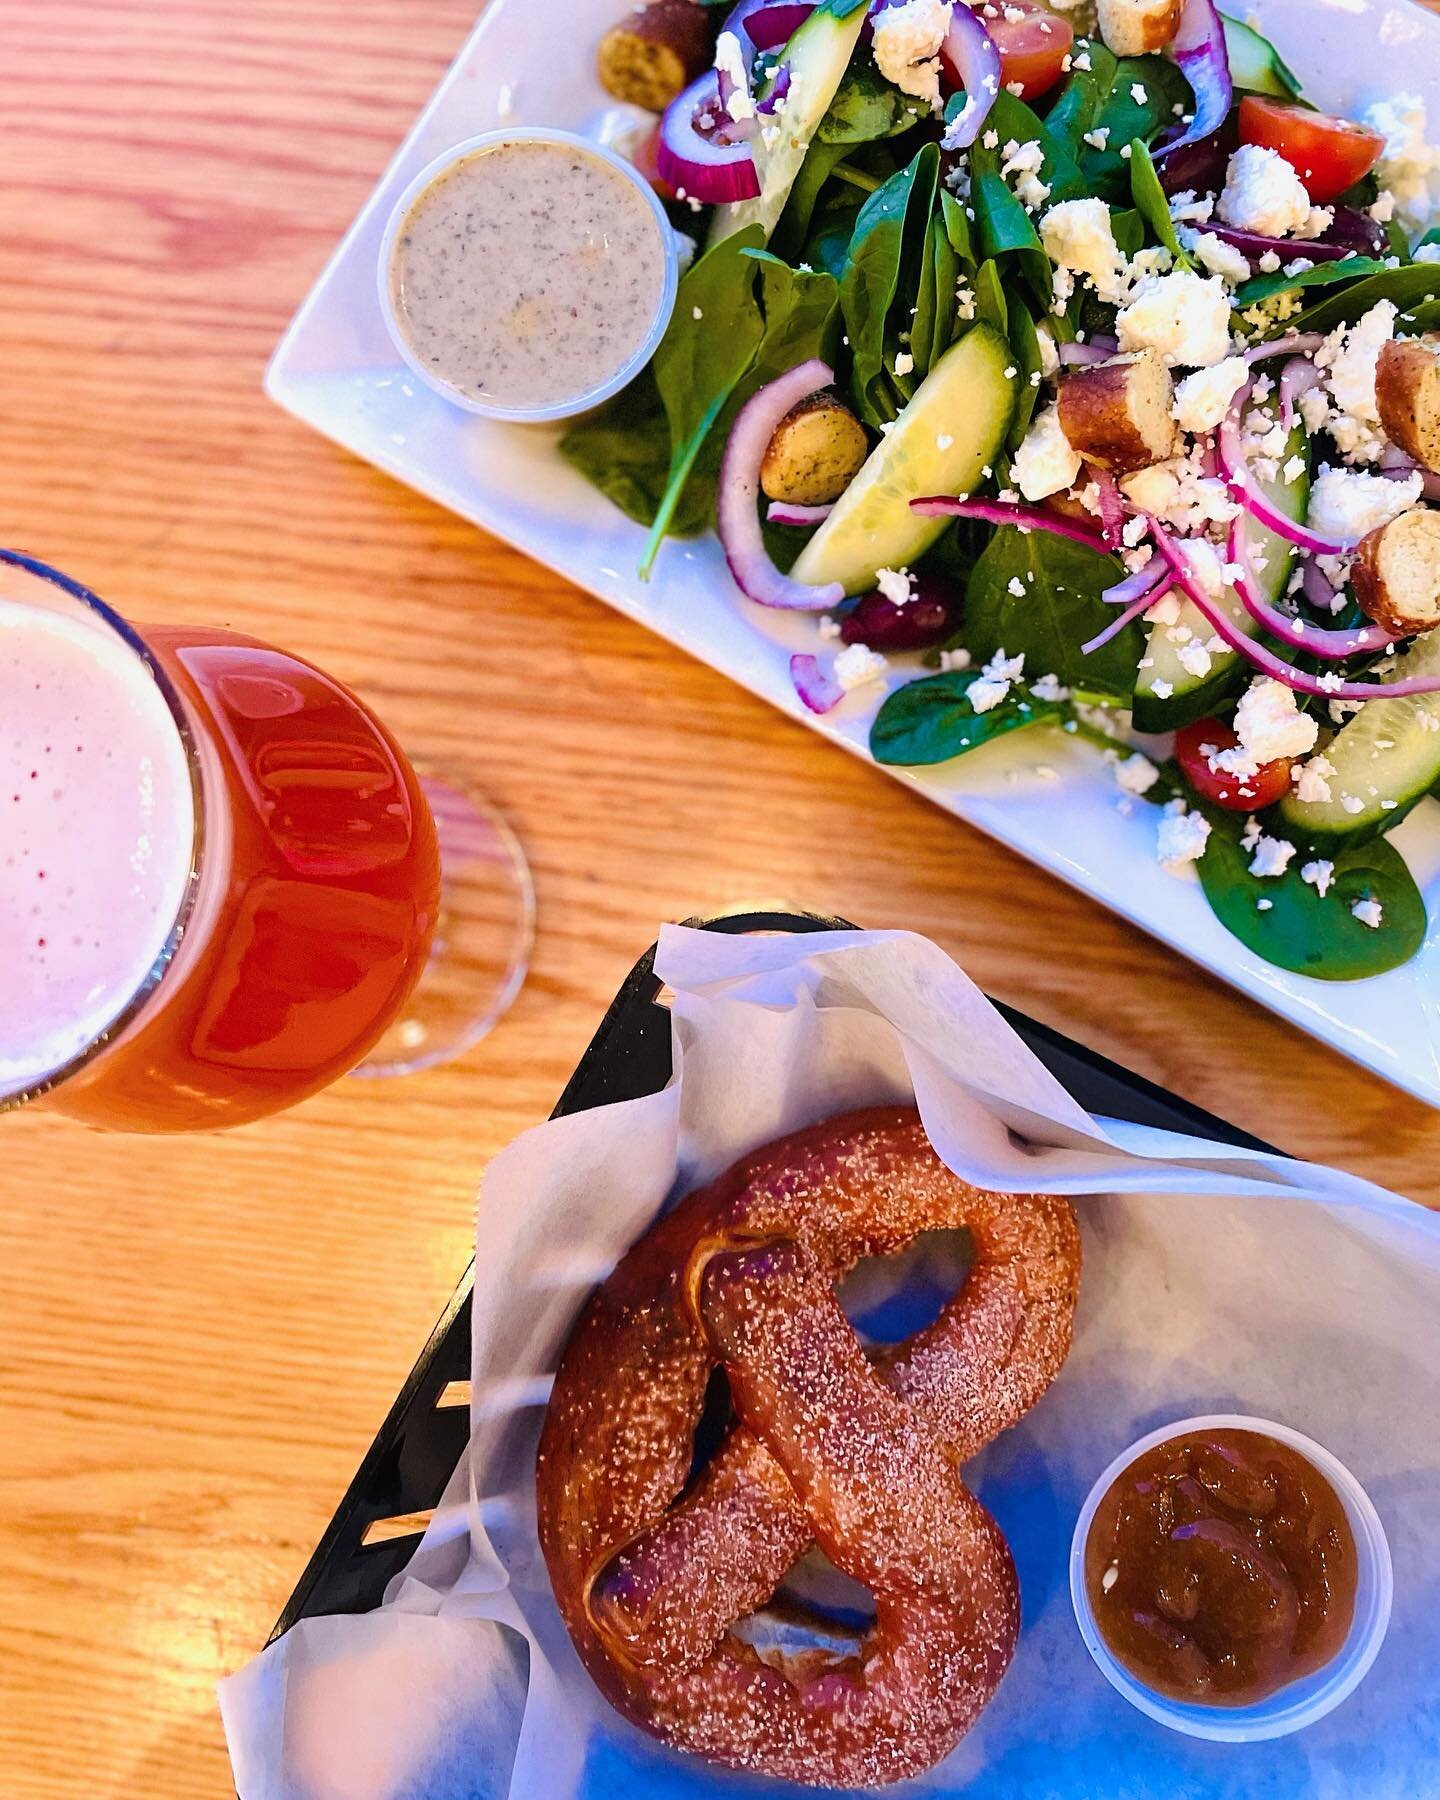 We&rsquo;ve got a couple of things on our minds when it comes to @maltedbarleyprovidence&hellip; 

1. THIS SPREAD: The Berliner Weisse with Raspberry! 🥨 The tomato and mozzarella stuffed pretzel! The Greek salad!

2. THE GAME: we hear that The Malte